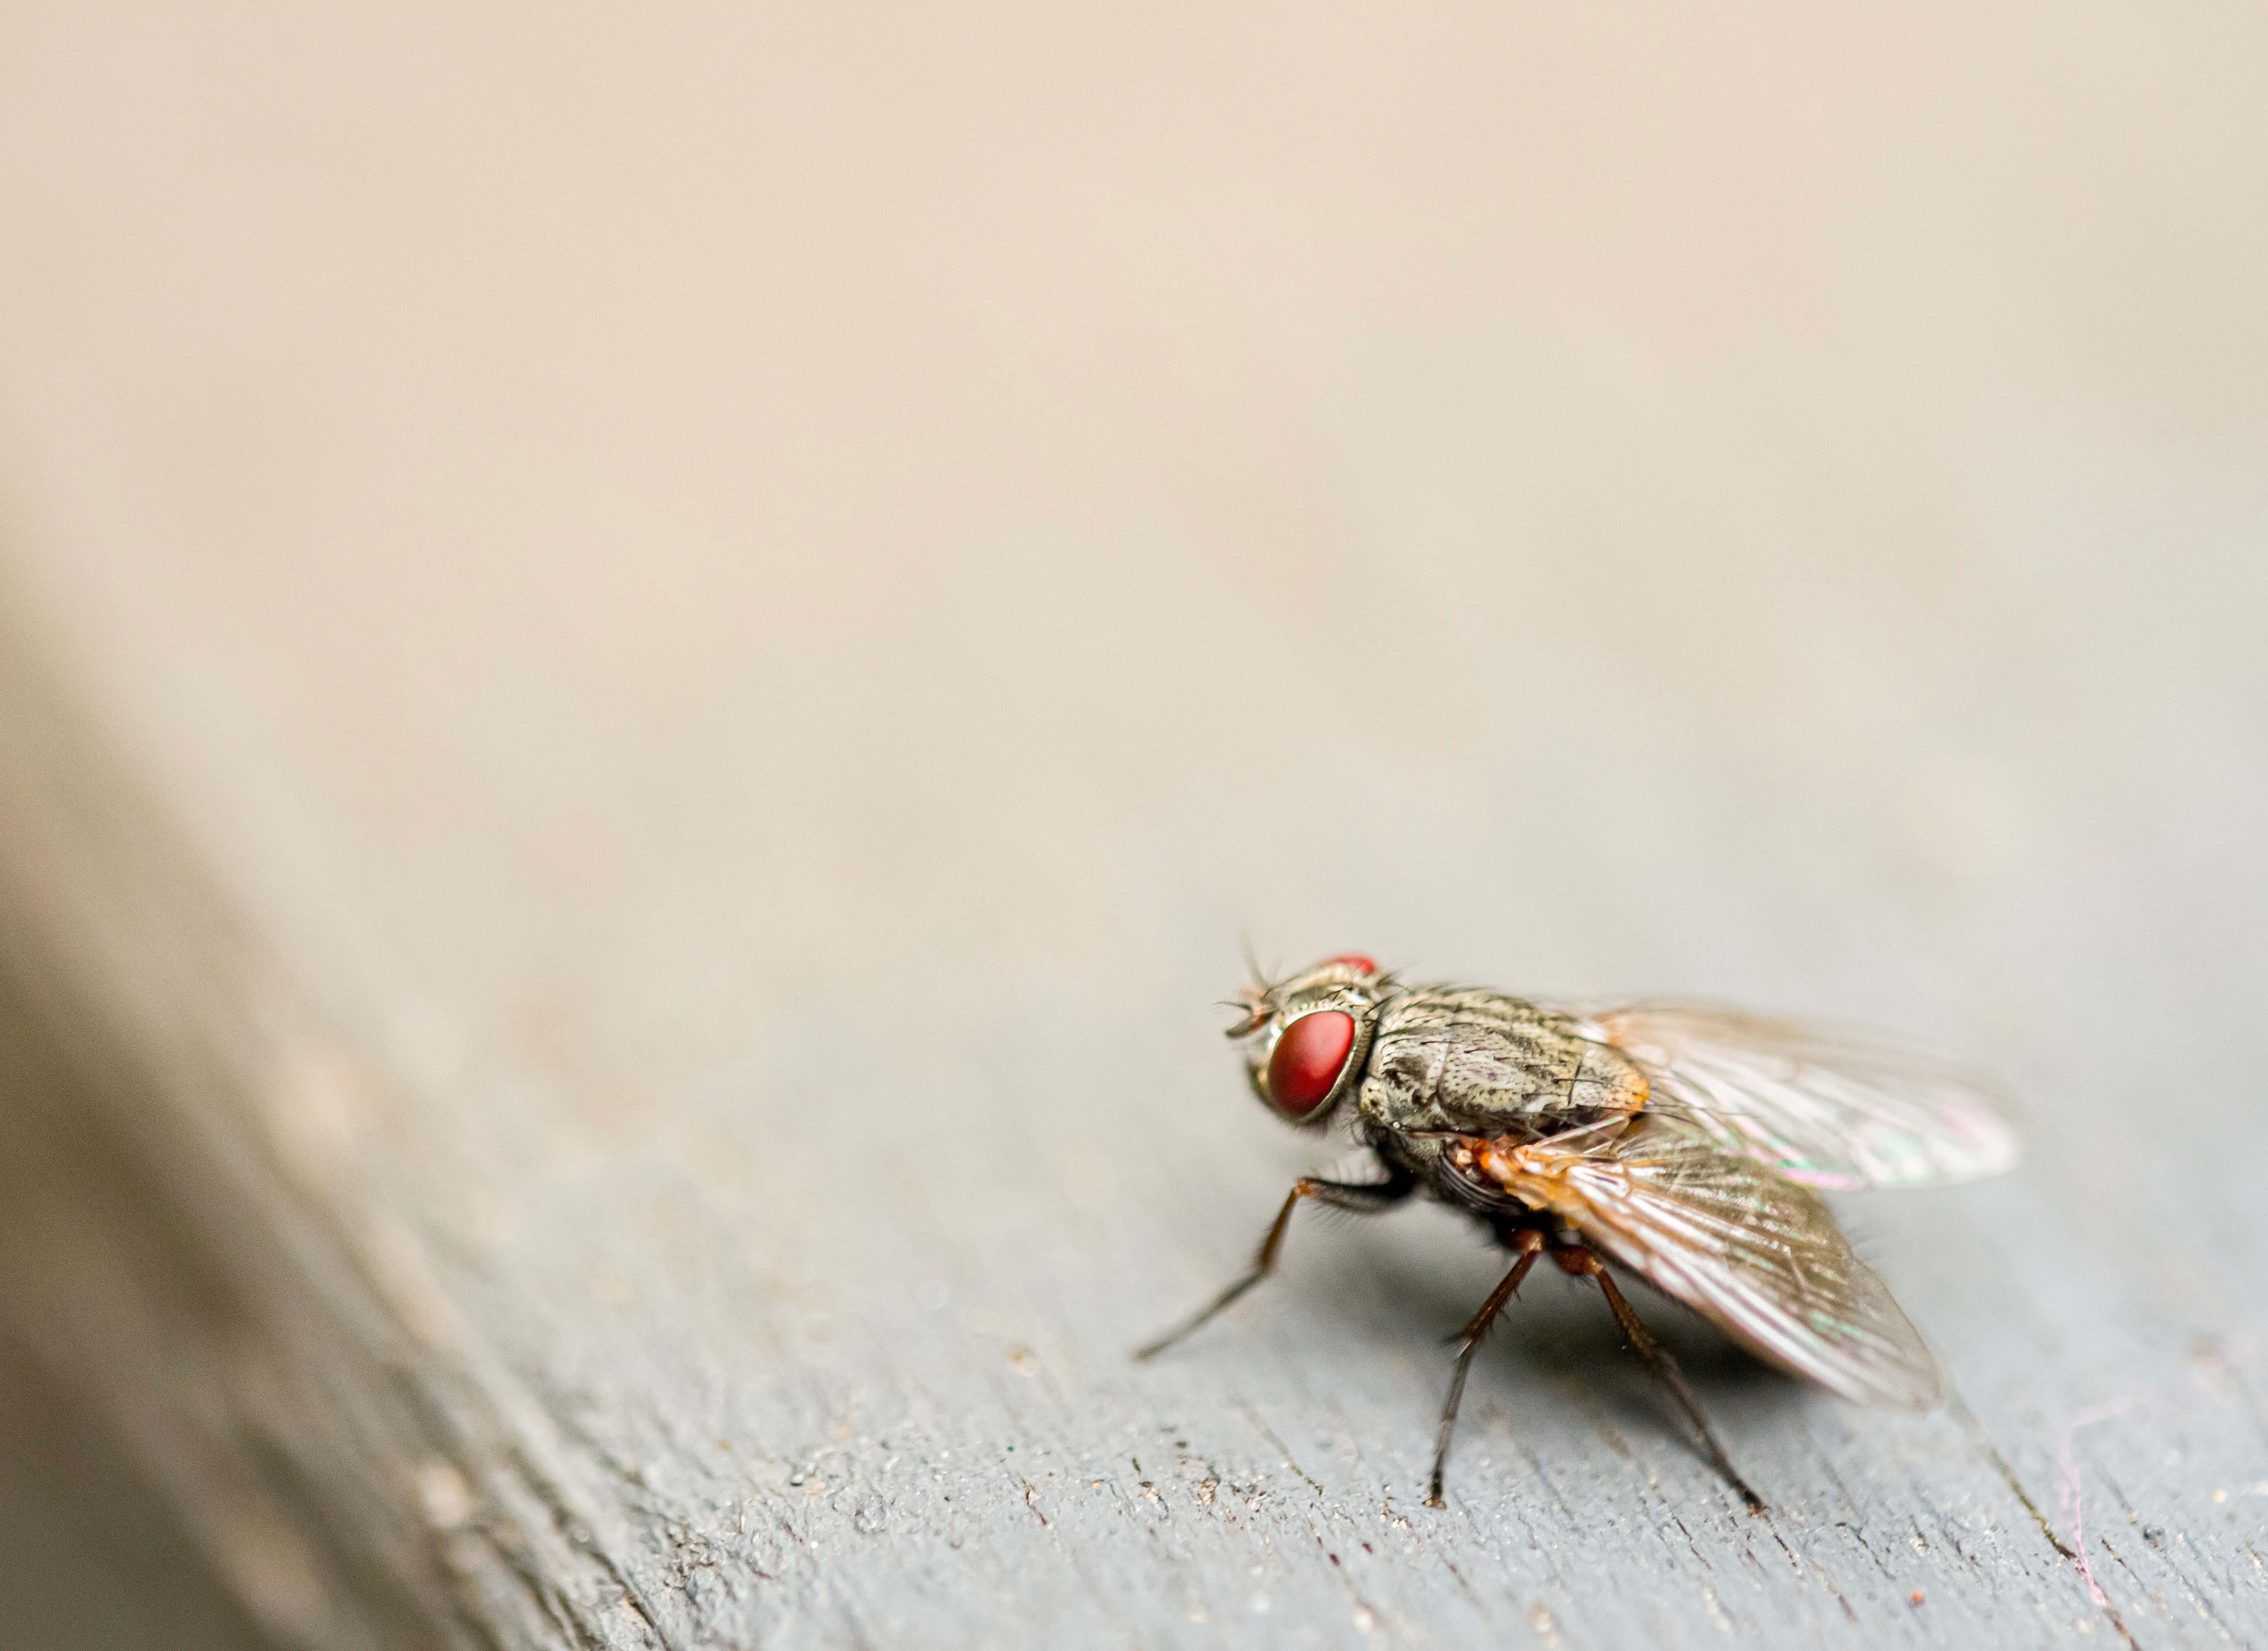 Fly sitting on wood